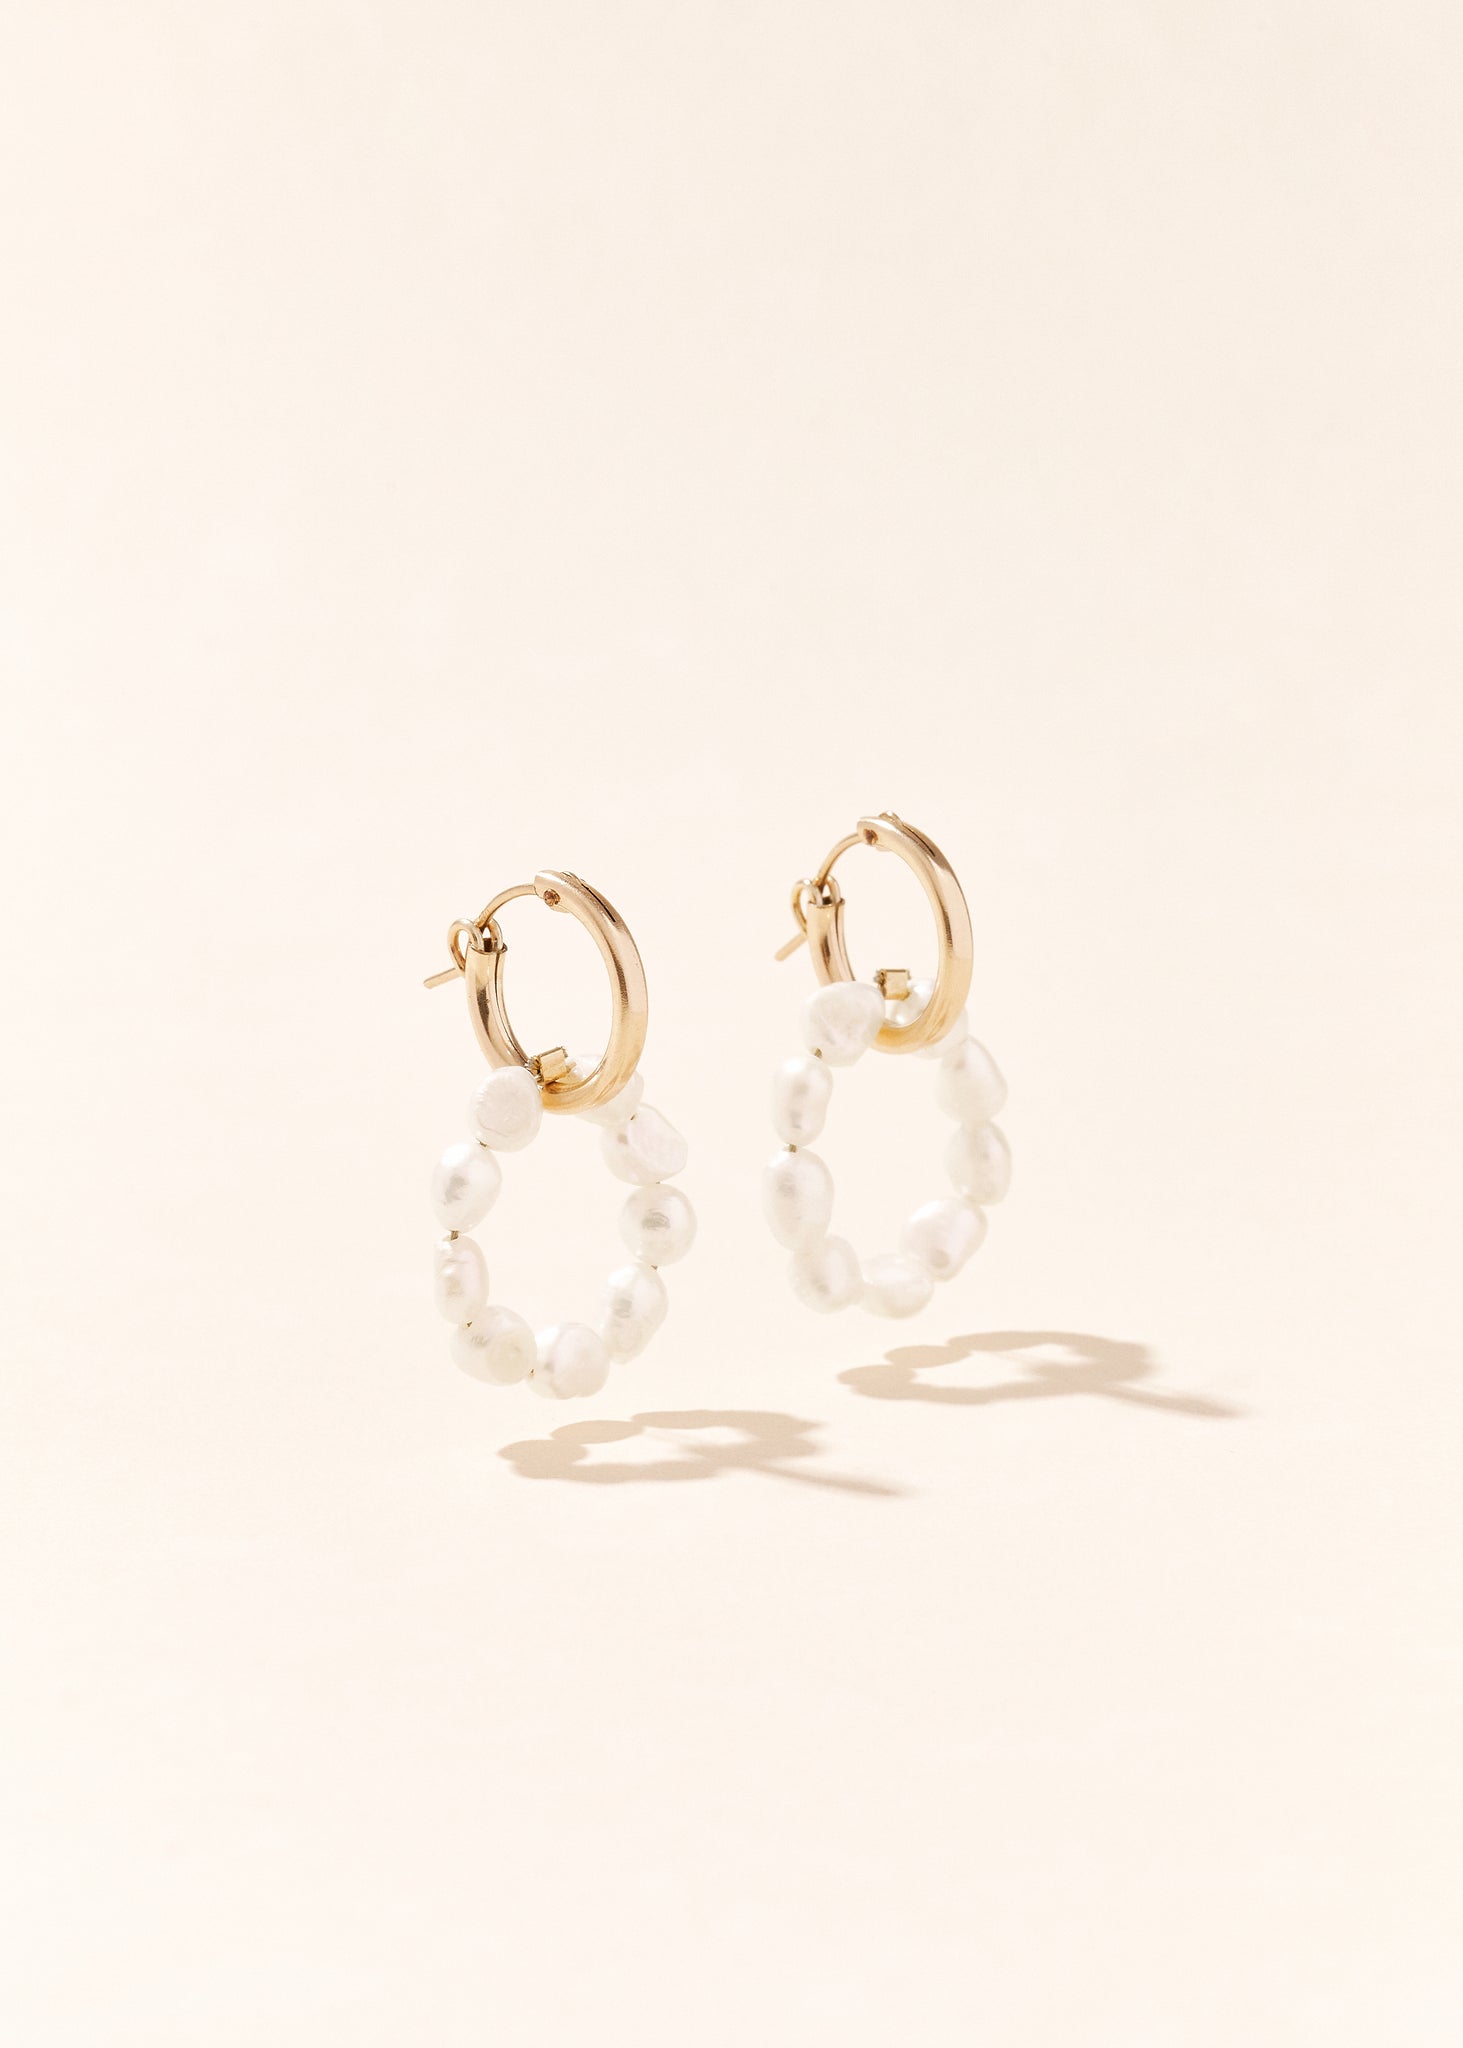 The pearly hoops